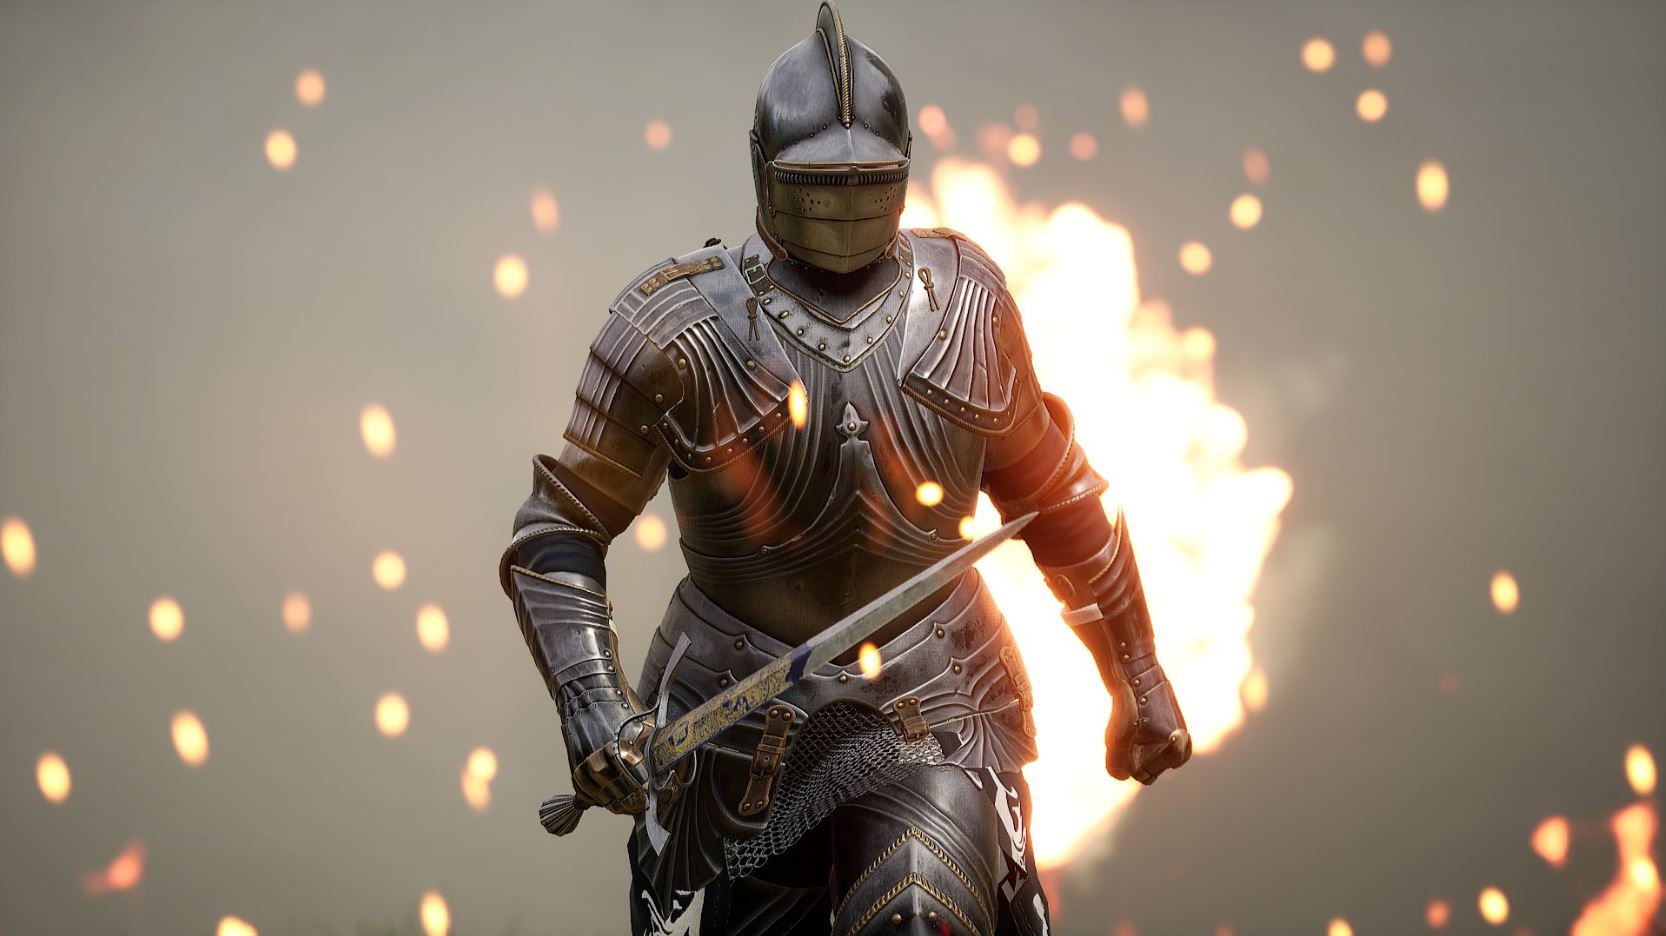 Multiplayer hit Mordhau slashes its way onto consoles later
this year